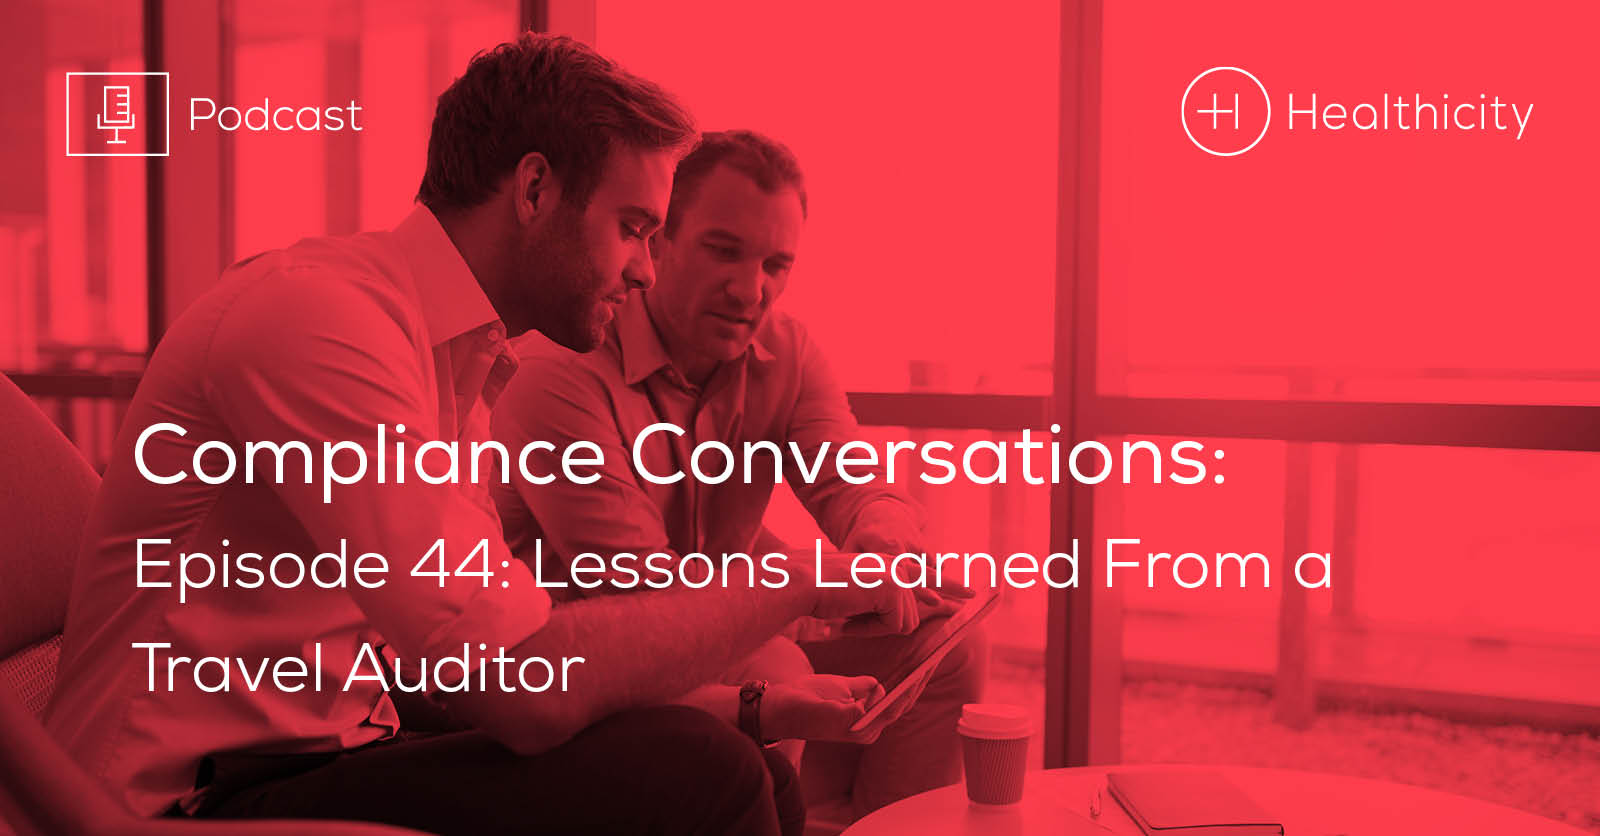 Listen to the Episode - Lessons Learned From a Travel Auditor